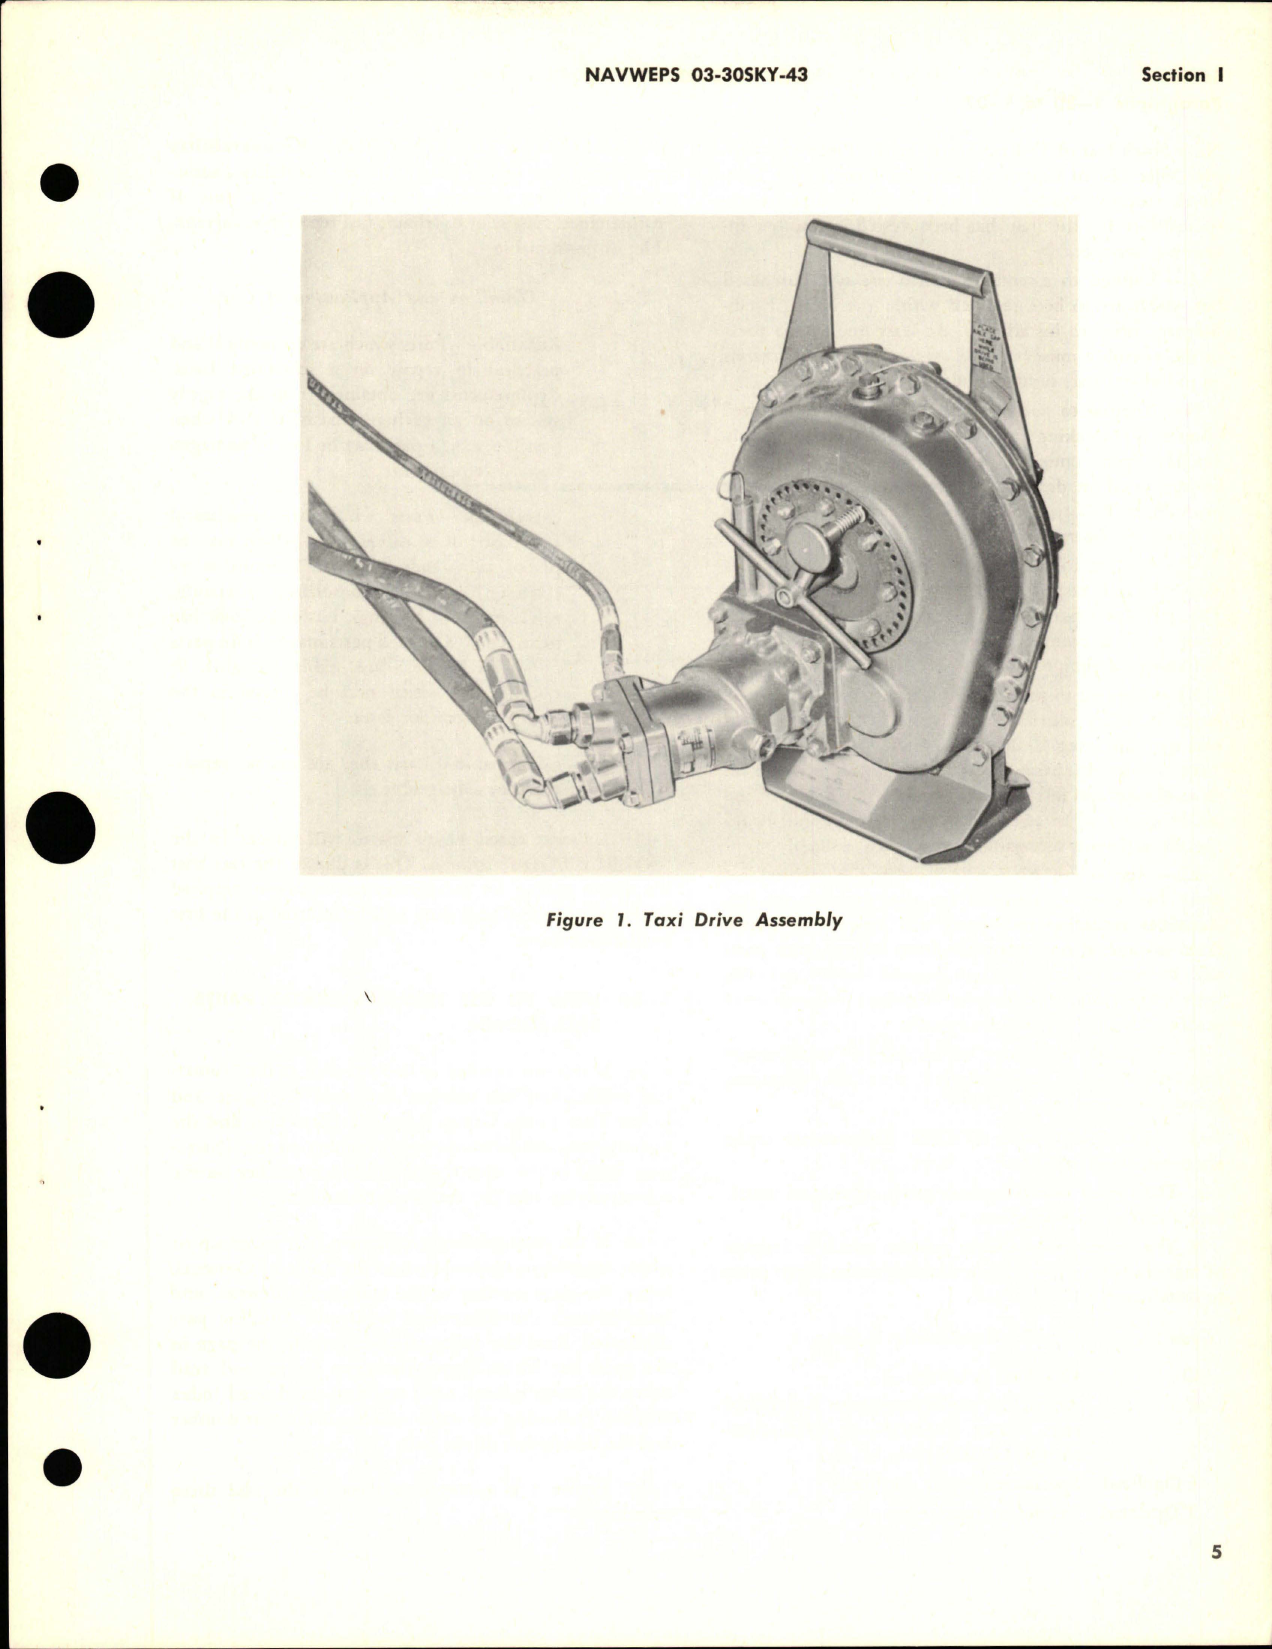 Sample page 7 from AirCorps Library document: Illustrated Parts Breakdown for Taxi Drive Assembly - Part S1570-10600